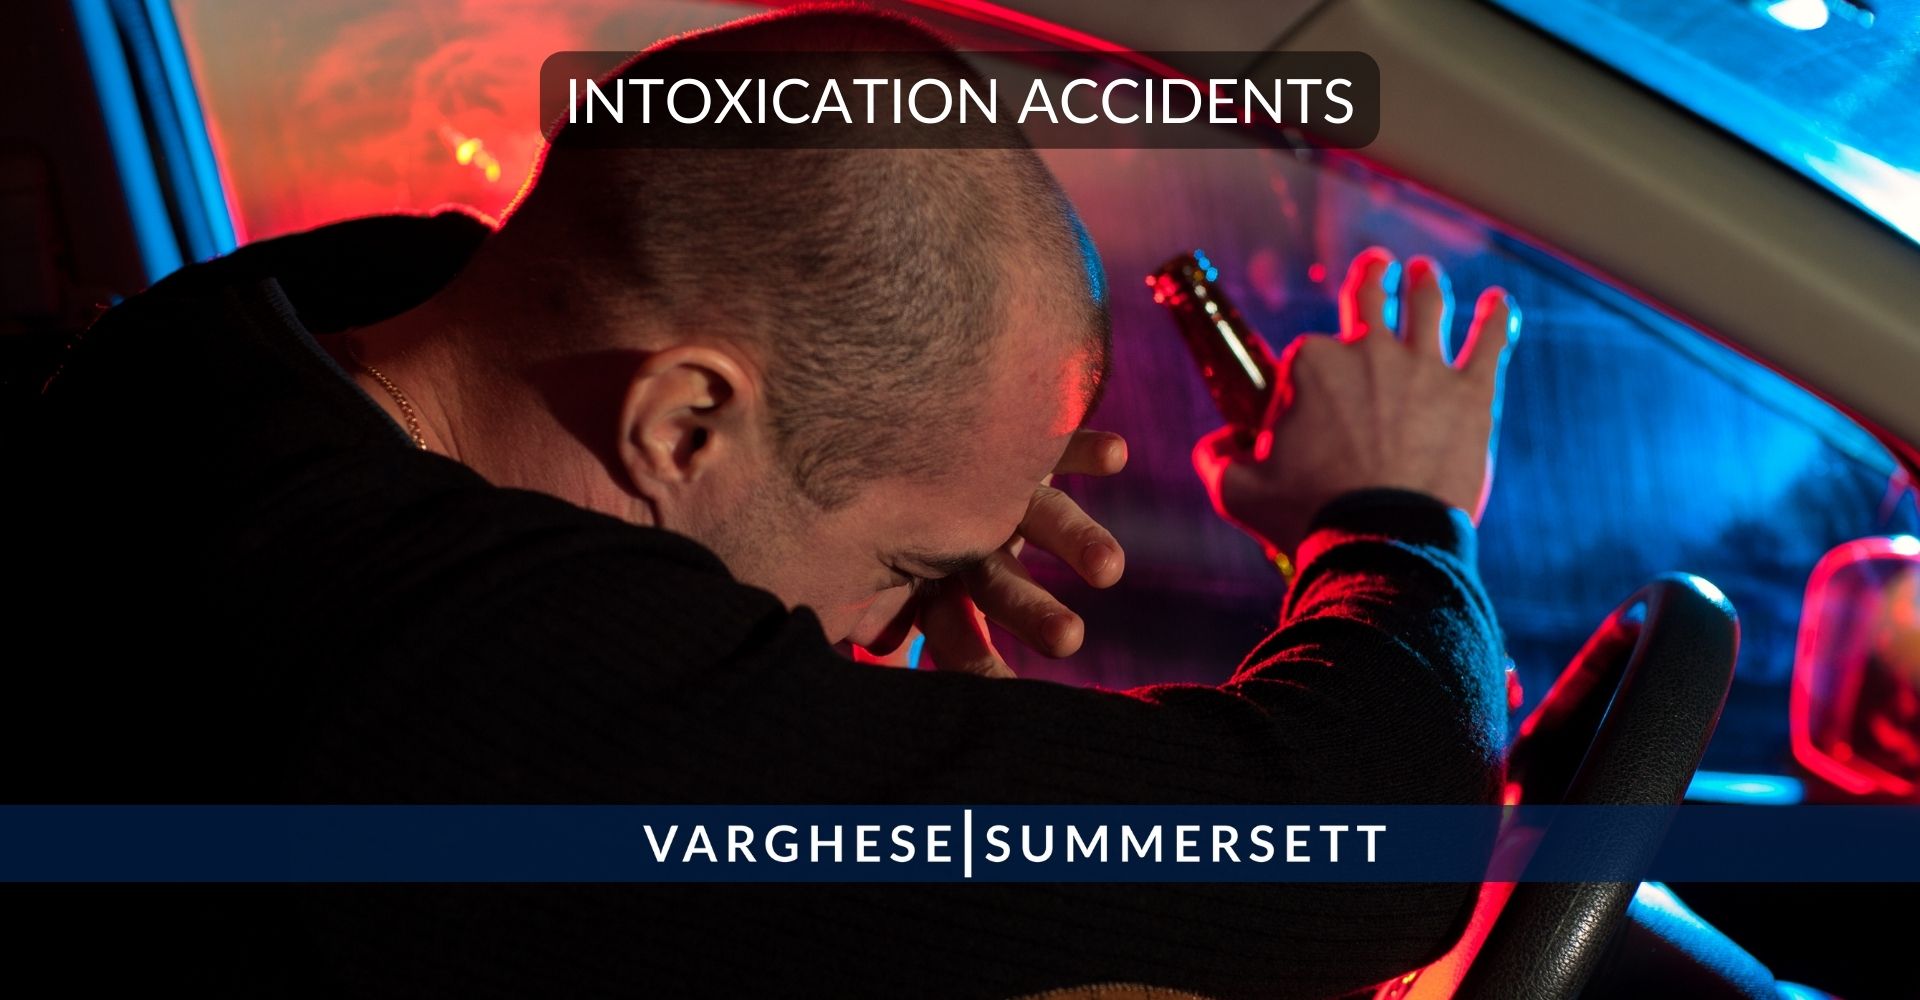 Holiday Intoxication Accidents